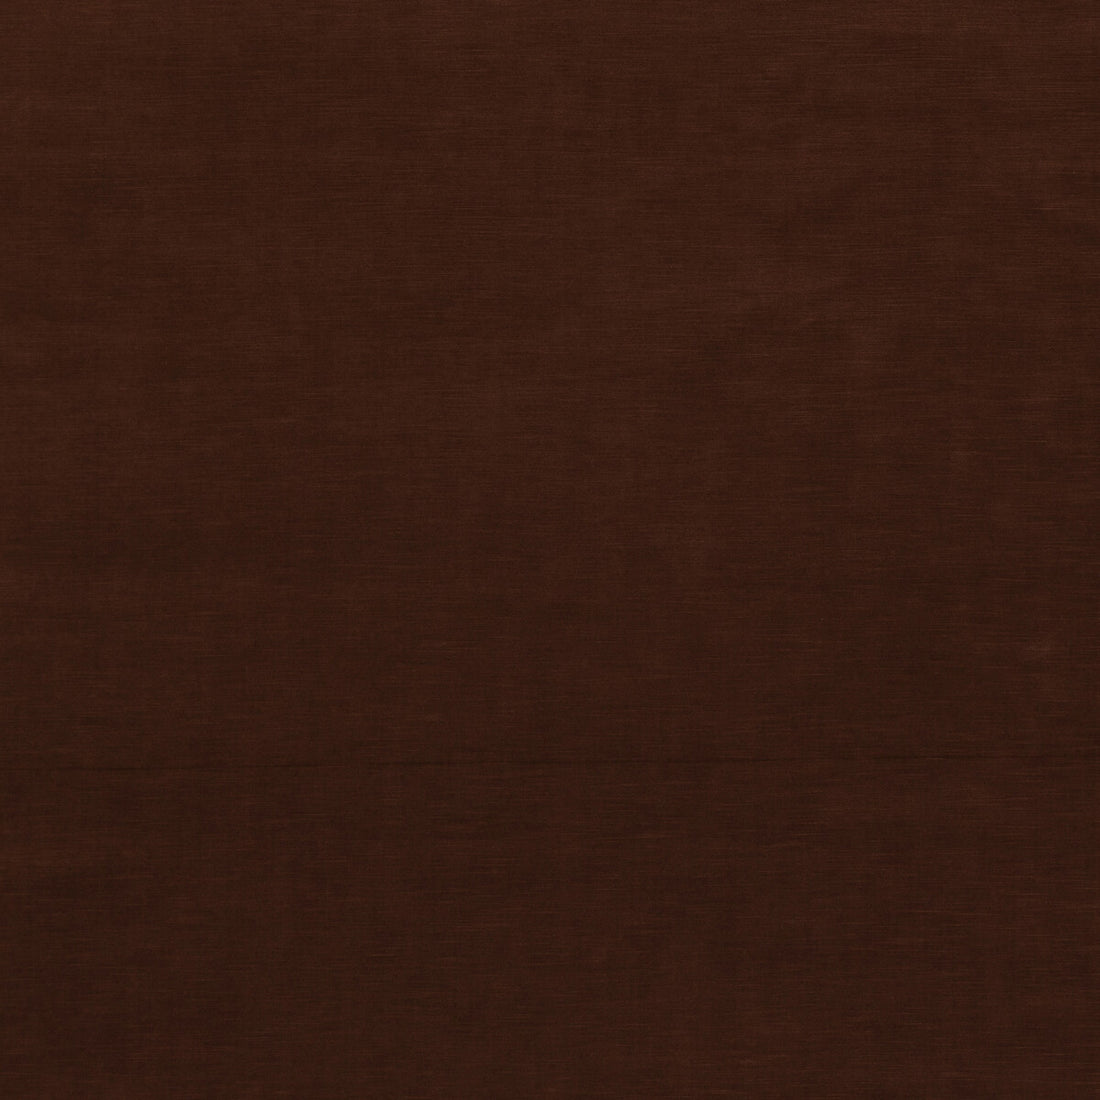 Quintessential Velvet fabric in chocolate color - pattern ED85359.290.0 - by Threads in the Quintessential Velvet collection